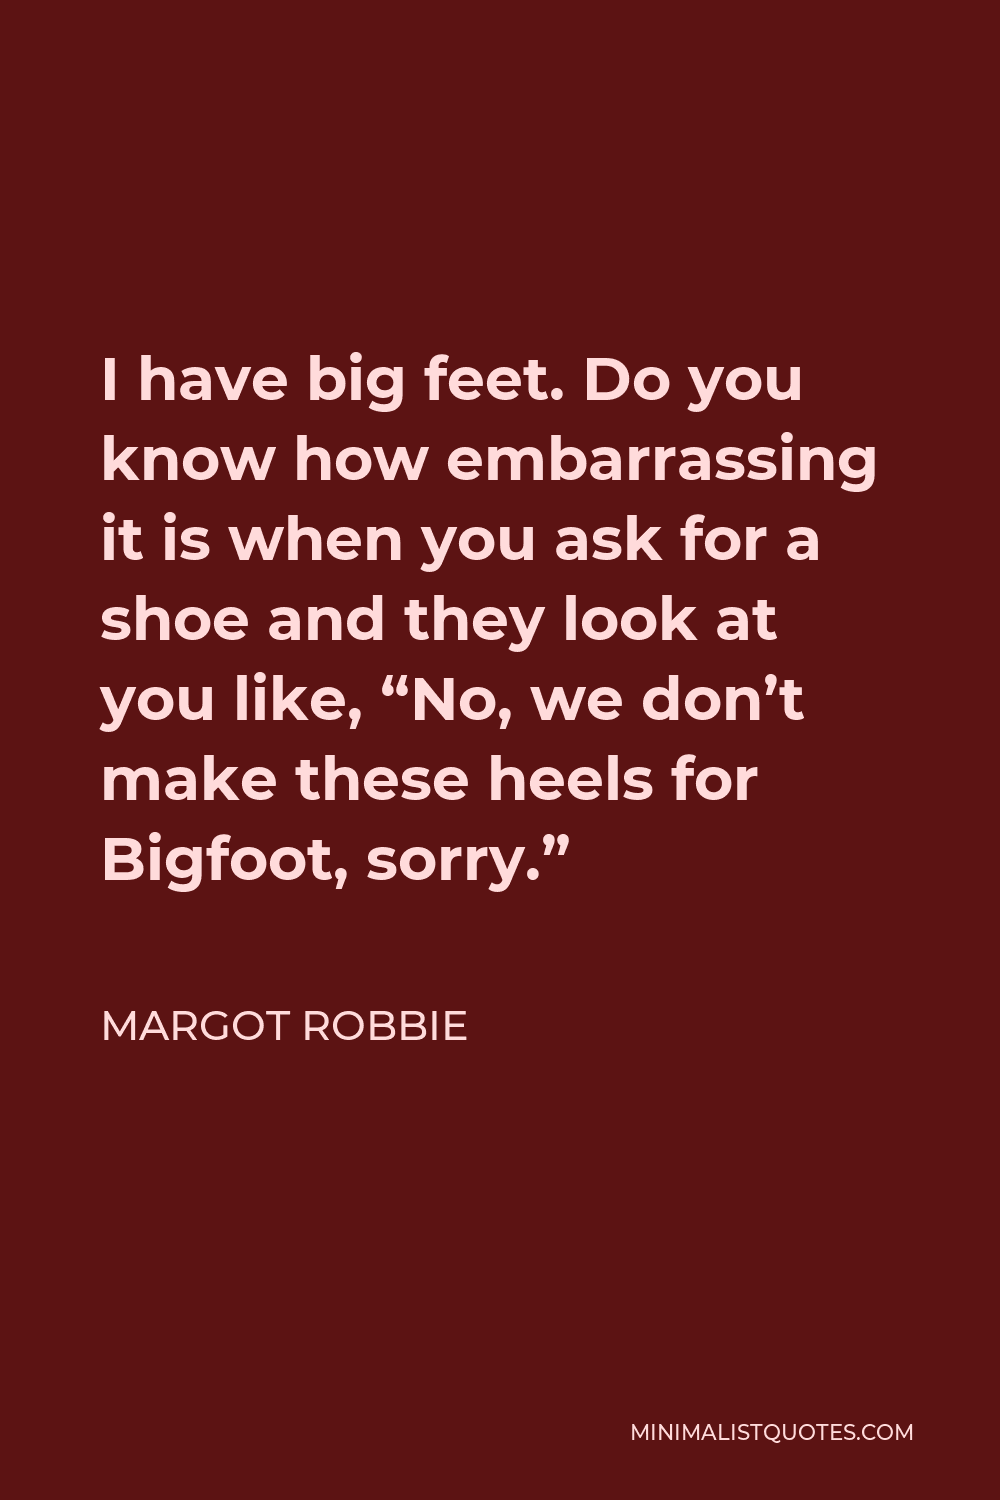 Margot Robbie Quote - I have big feet. Do you know how embarrassing it is when you ask for a shoe and they look at you like, “No, we don’t make these heels for Bigfoot, sorry.”